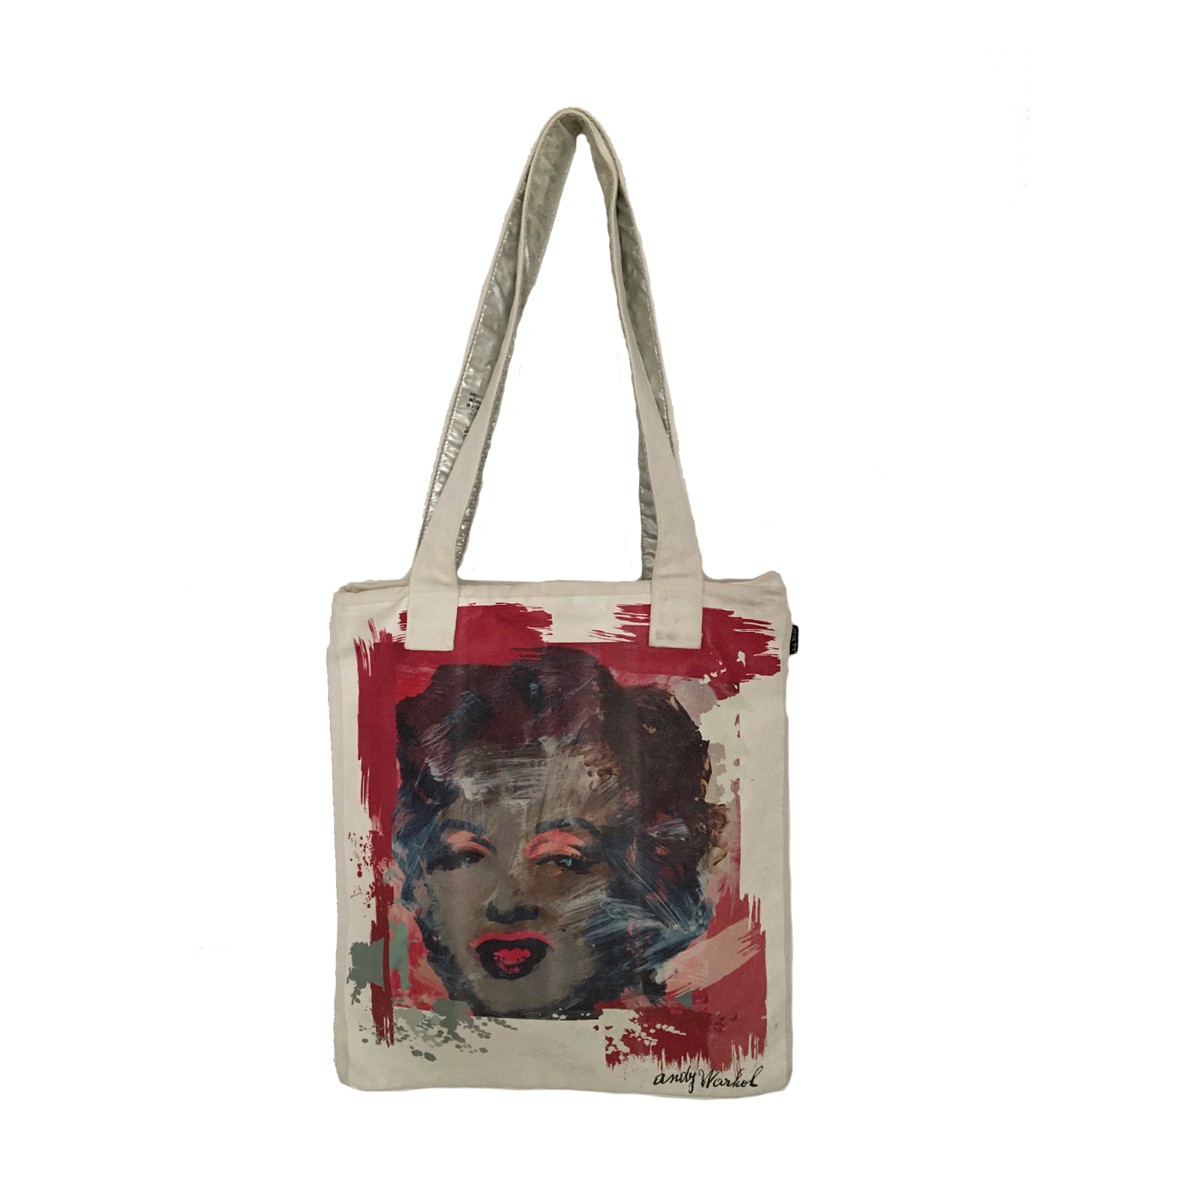 Limited edition Andy Warhol by Pepe jeans London tote bag | My good closet